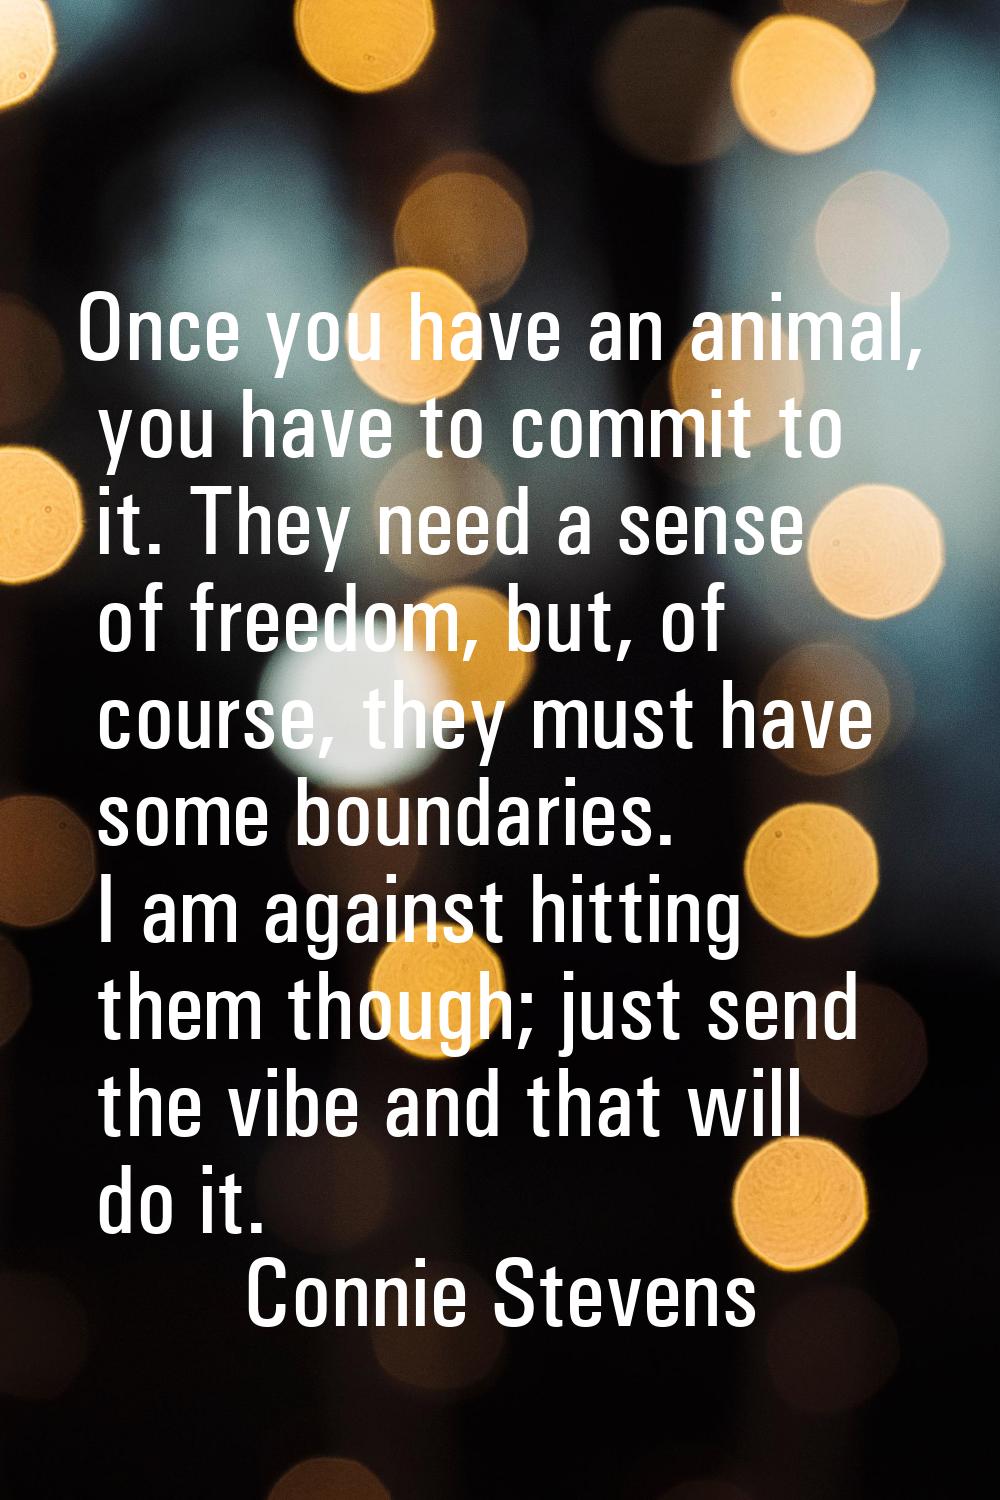 Once you have an animal, you have to commit to it. They need a sense of freedom, but, of course, th